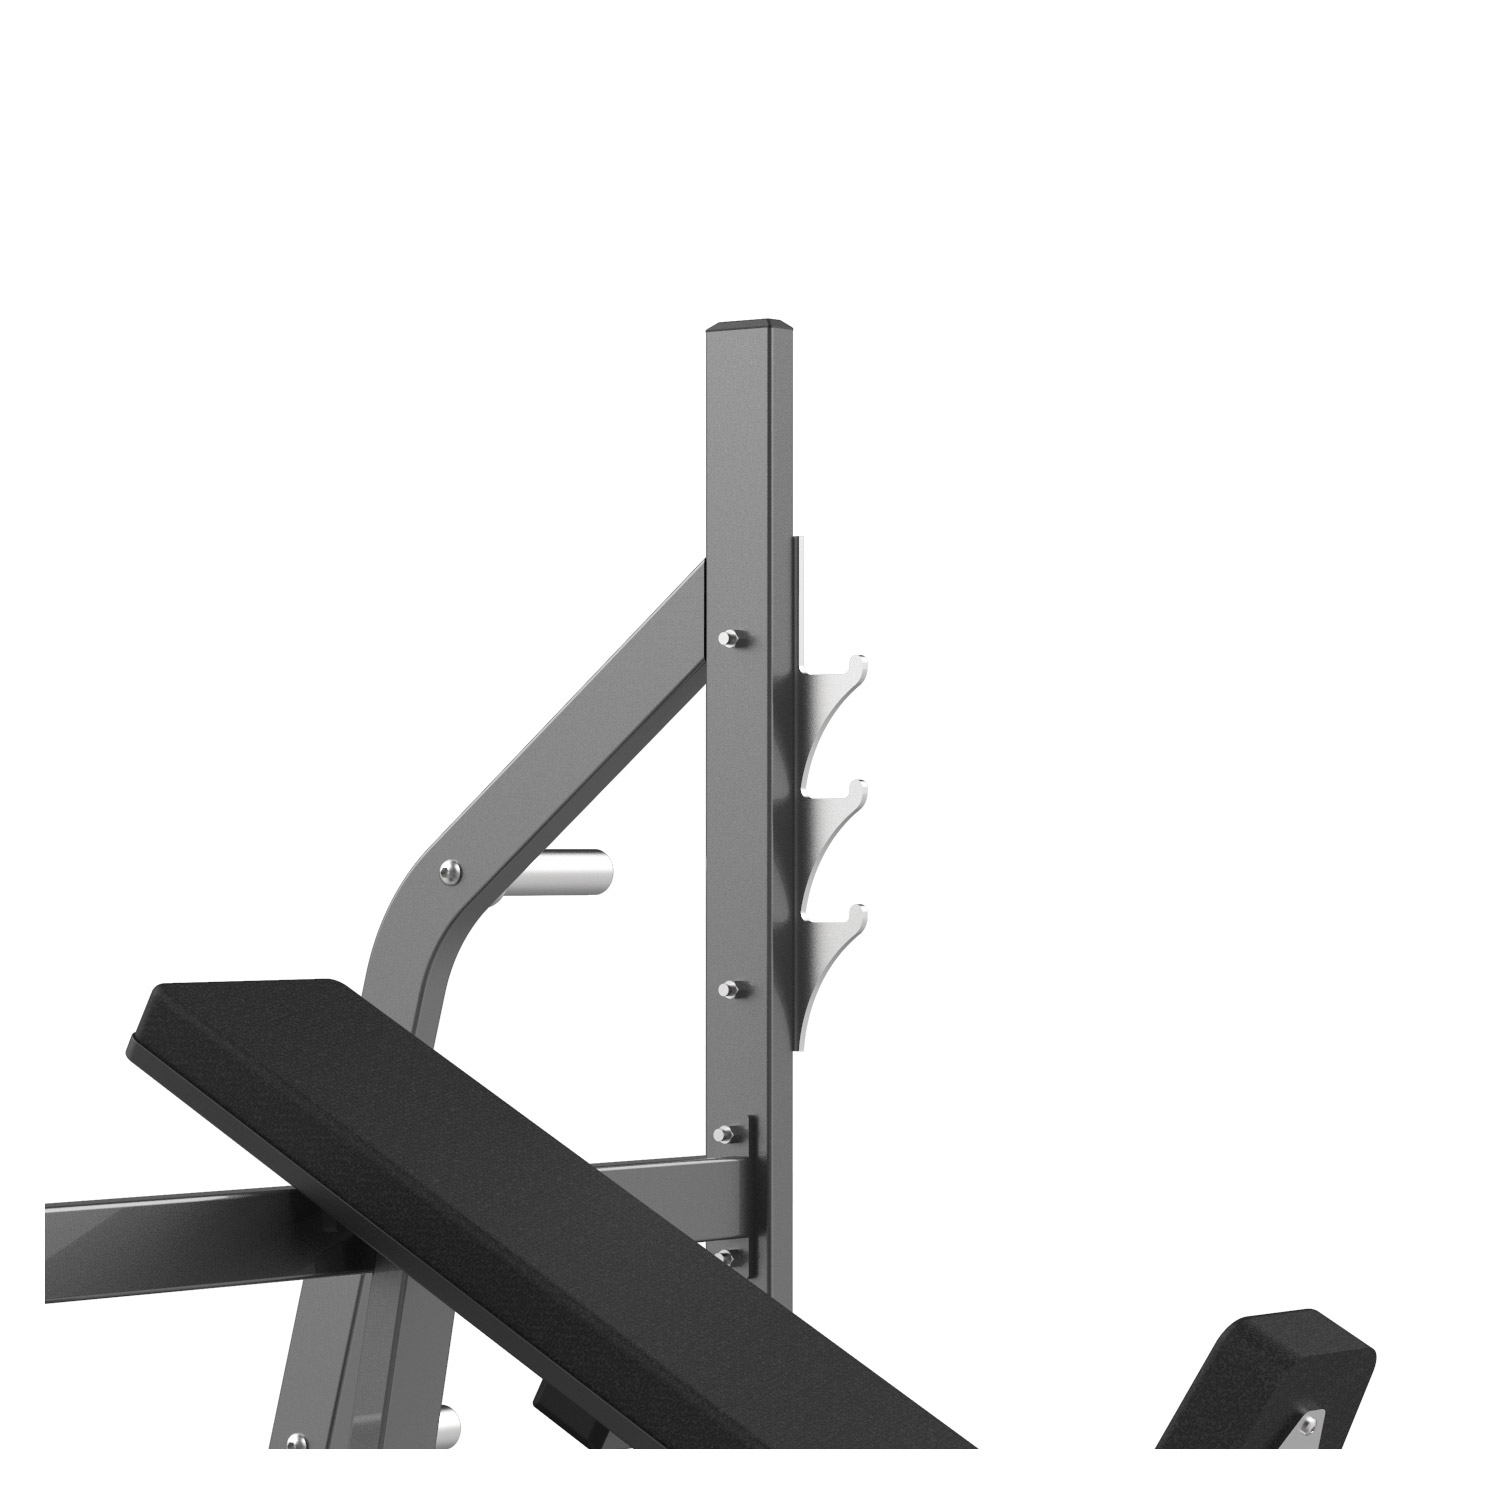 FW-2002 Olympic Incline Bench